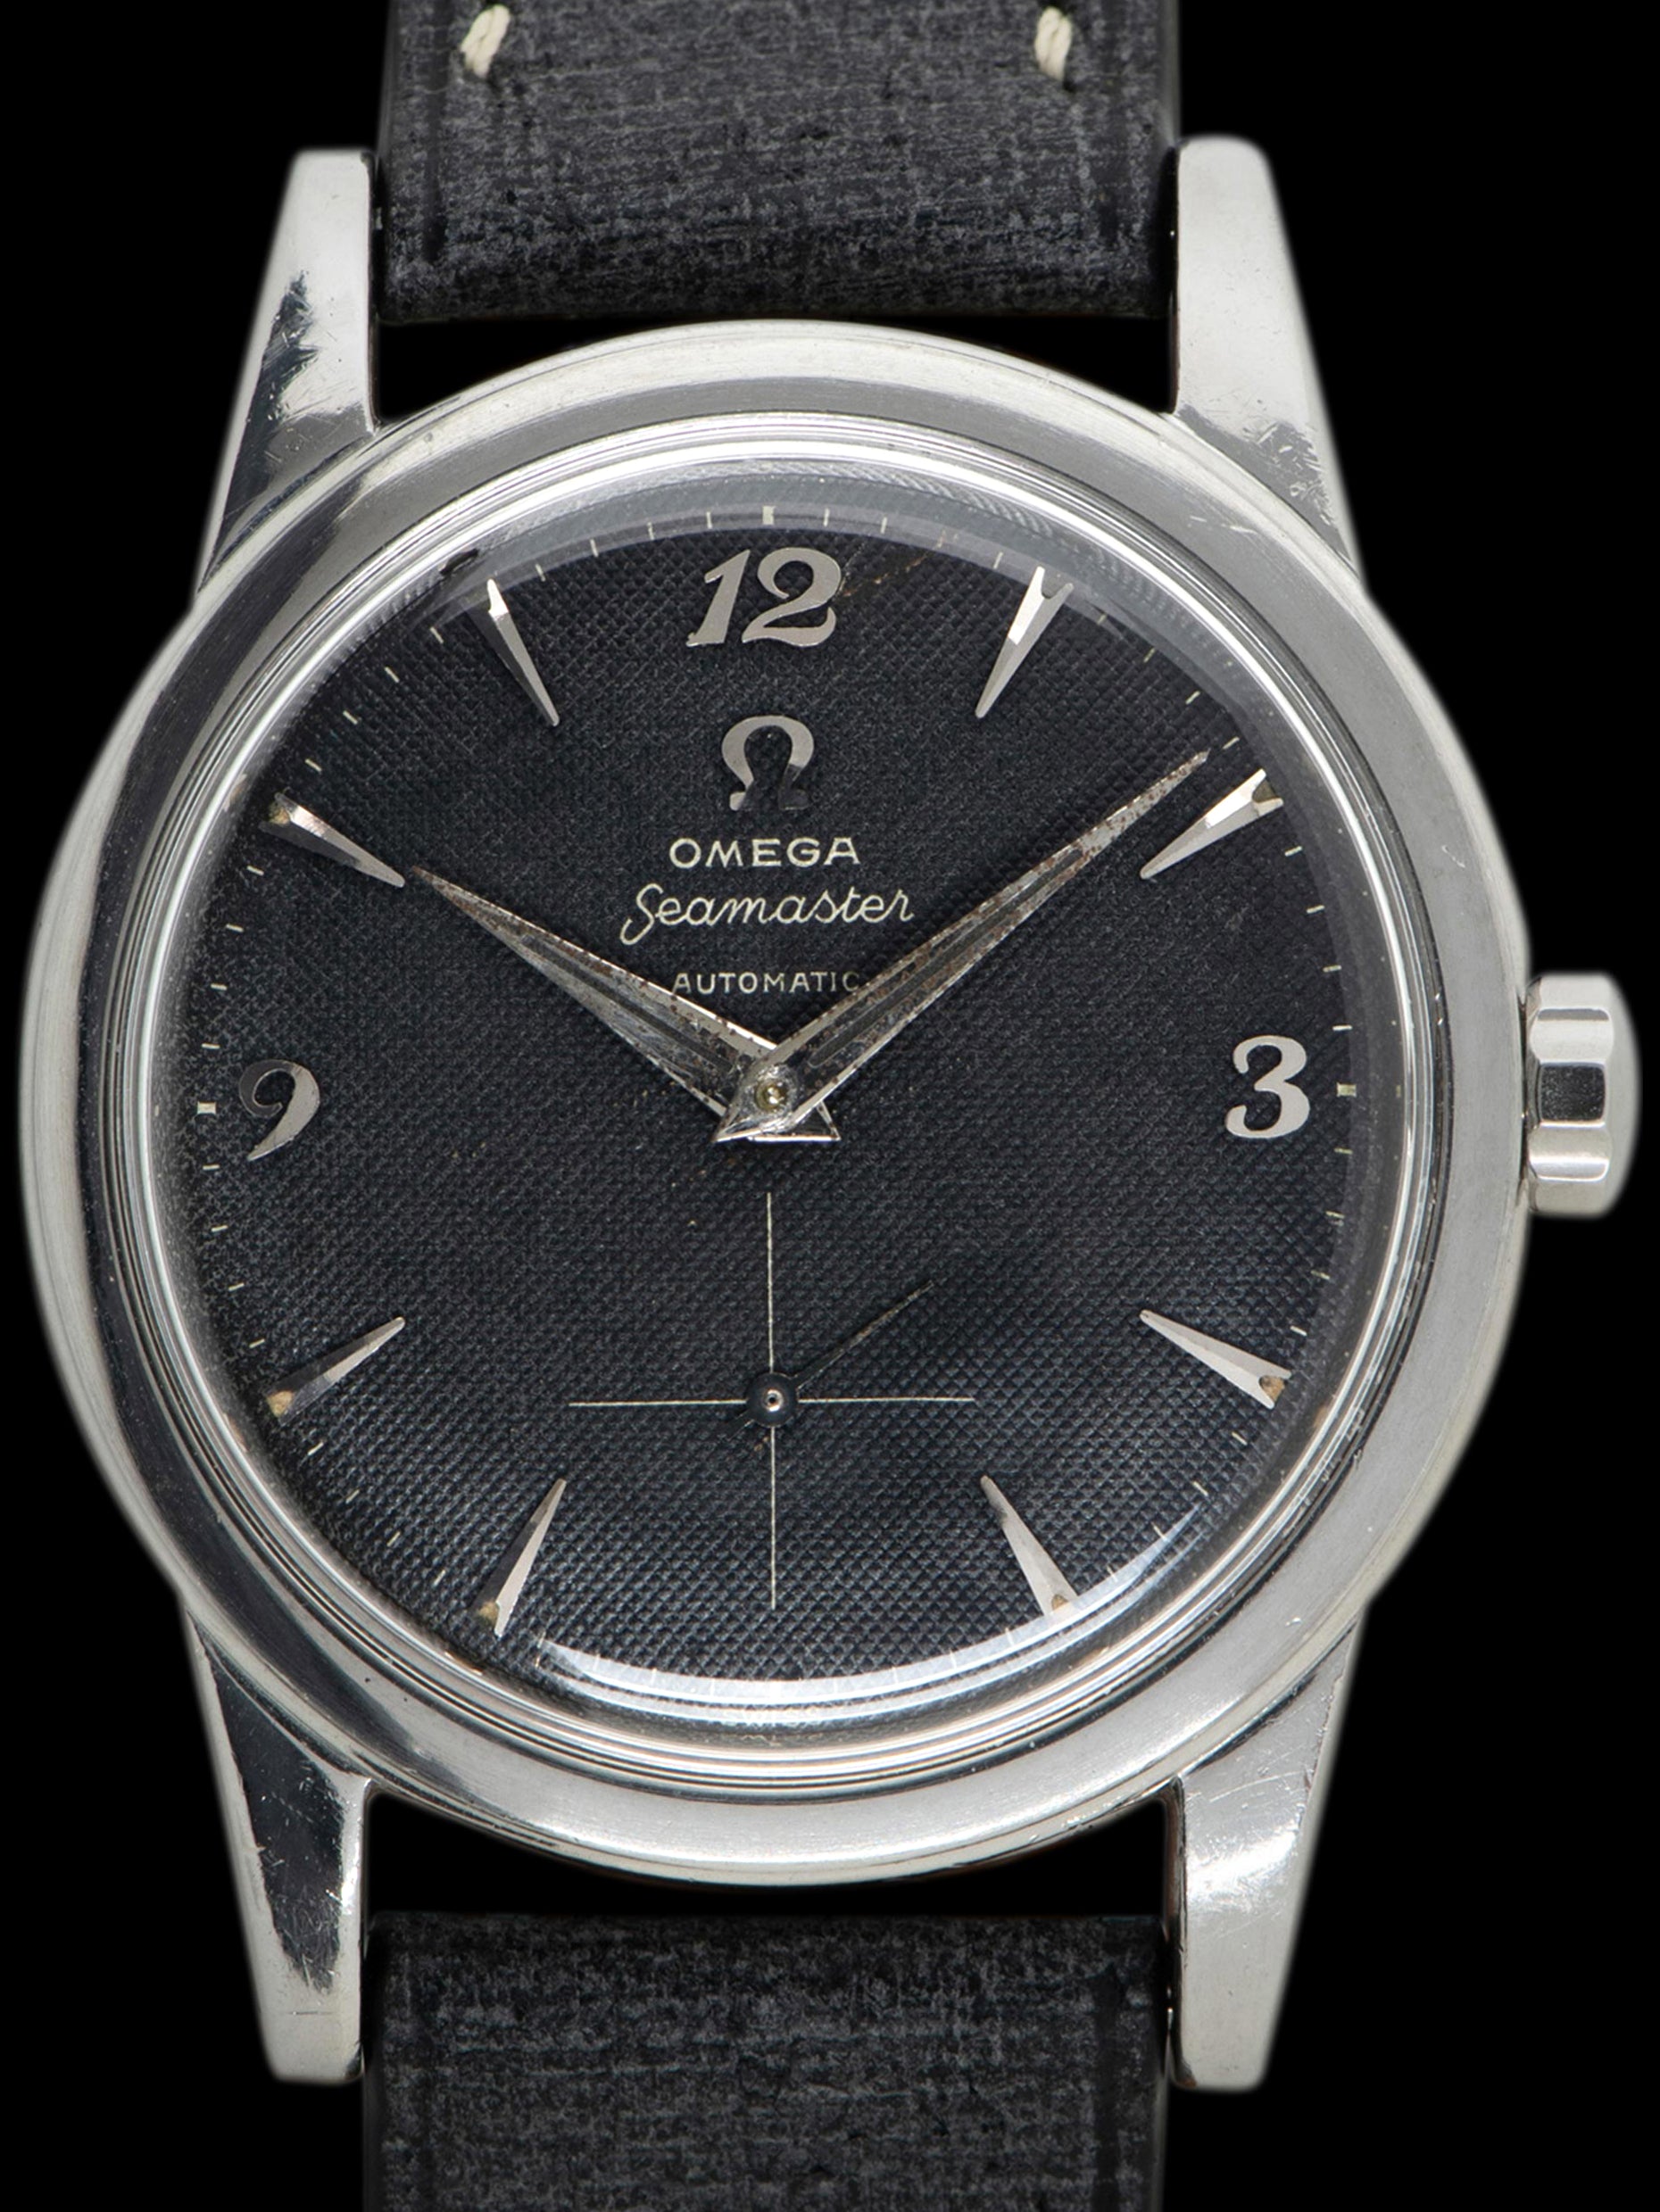 1954 Omega Seamaster Automatic (Ref. 2576-8) "Honeycomb Dial"